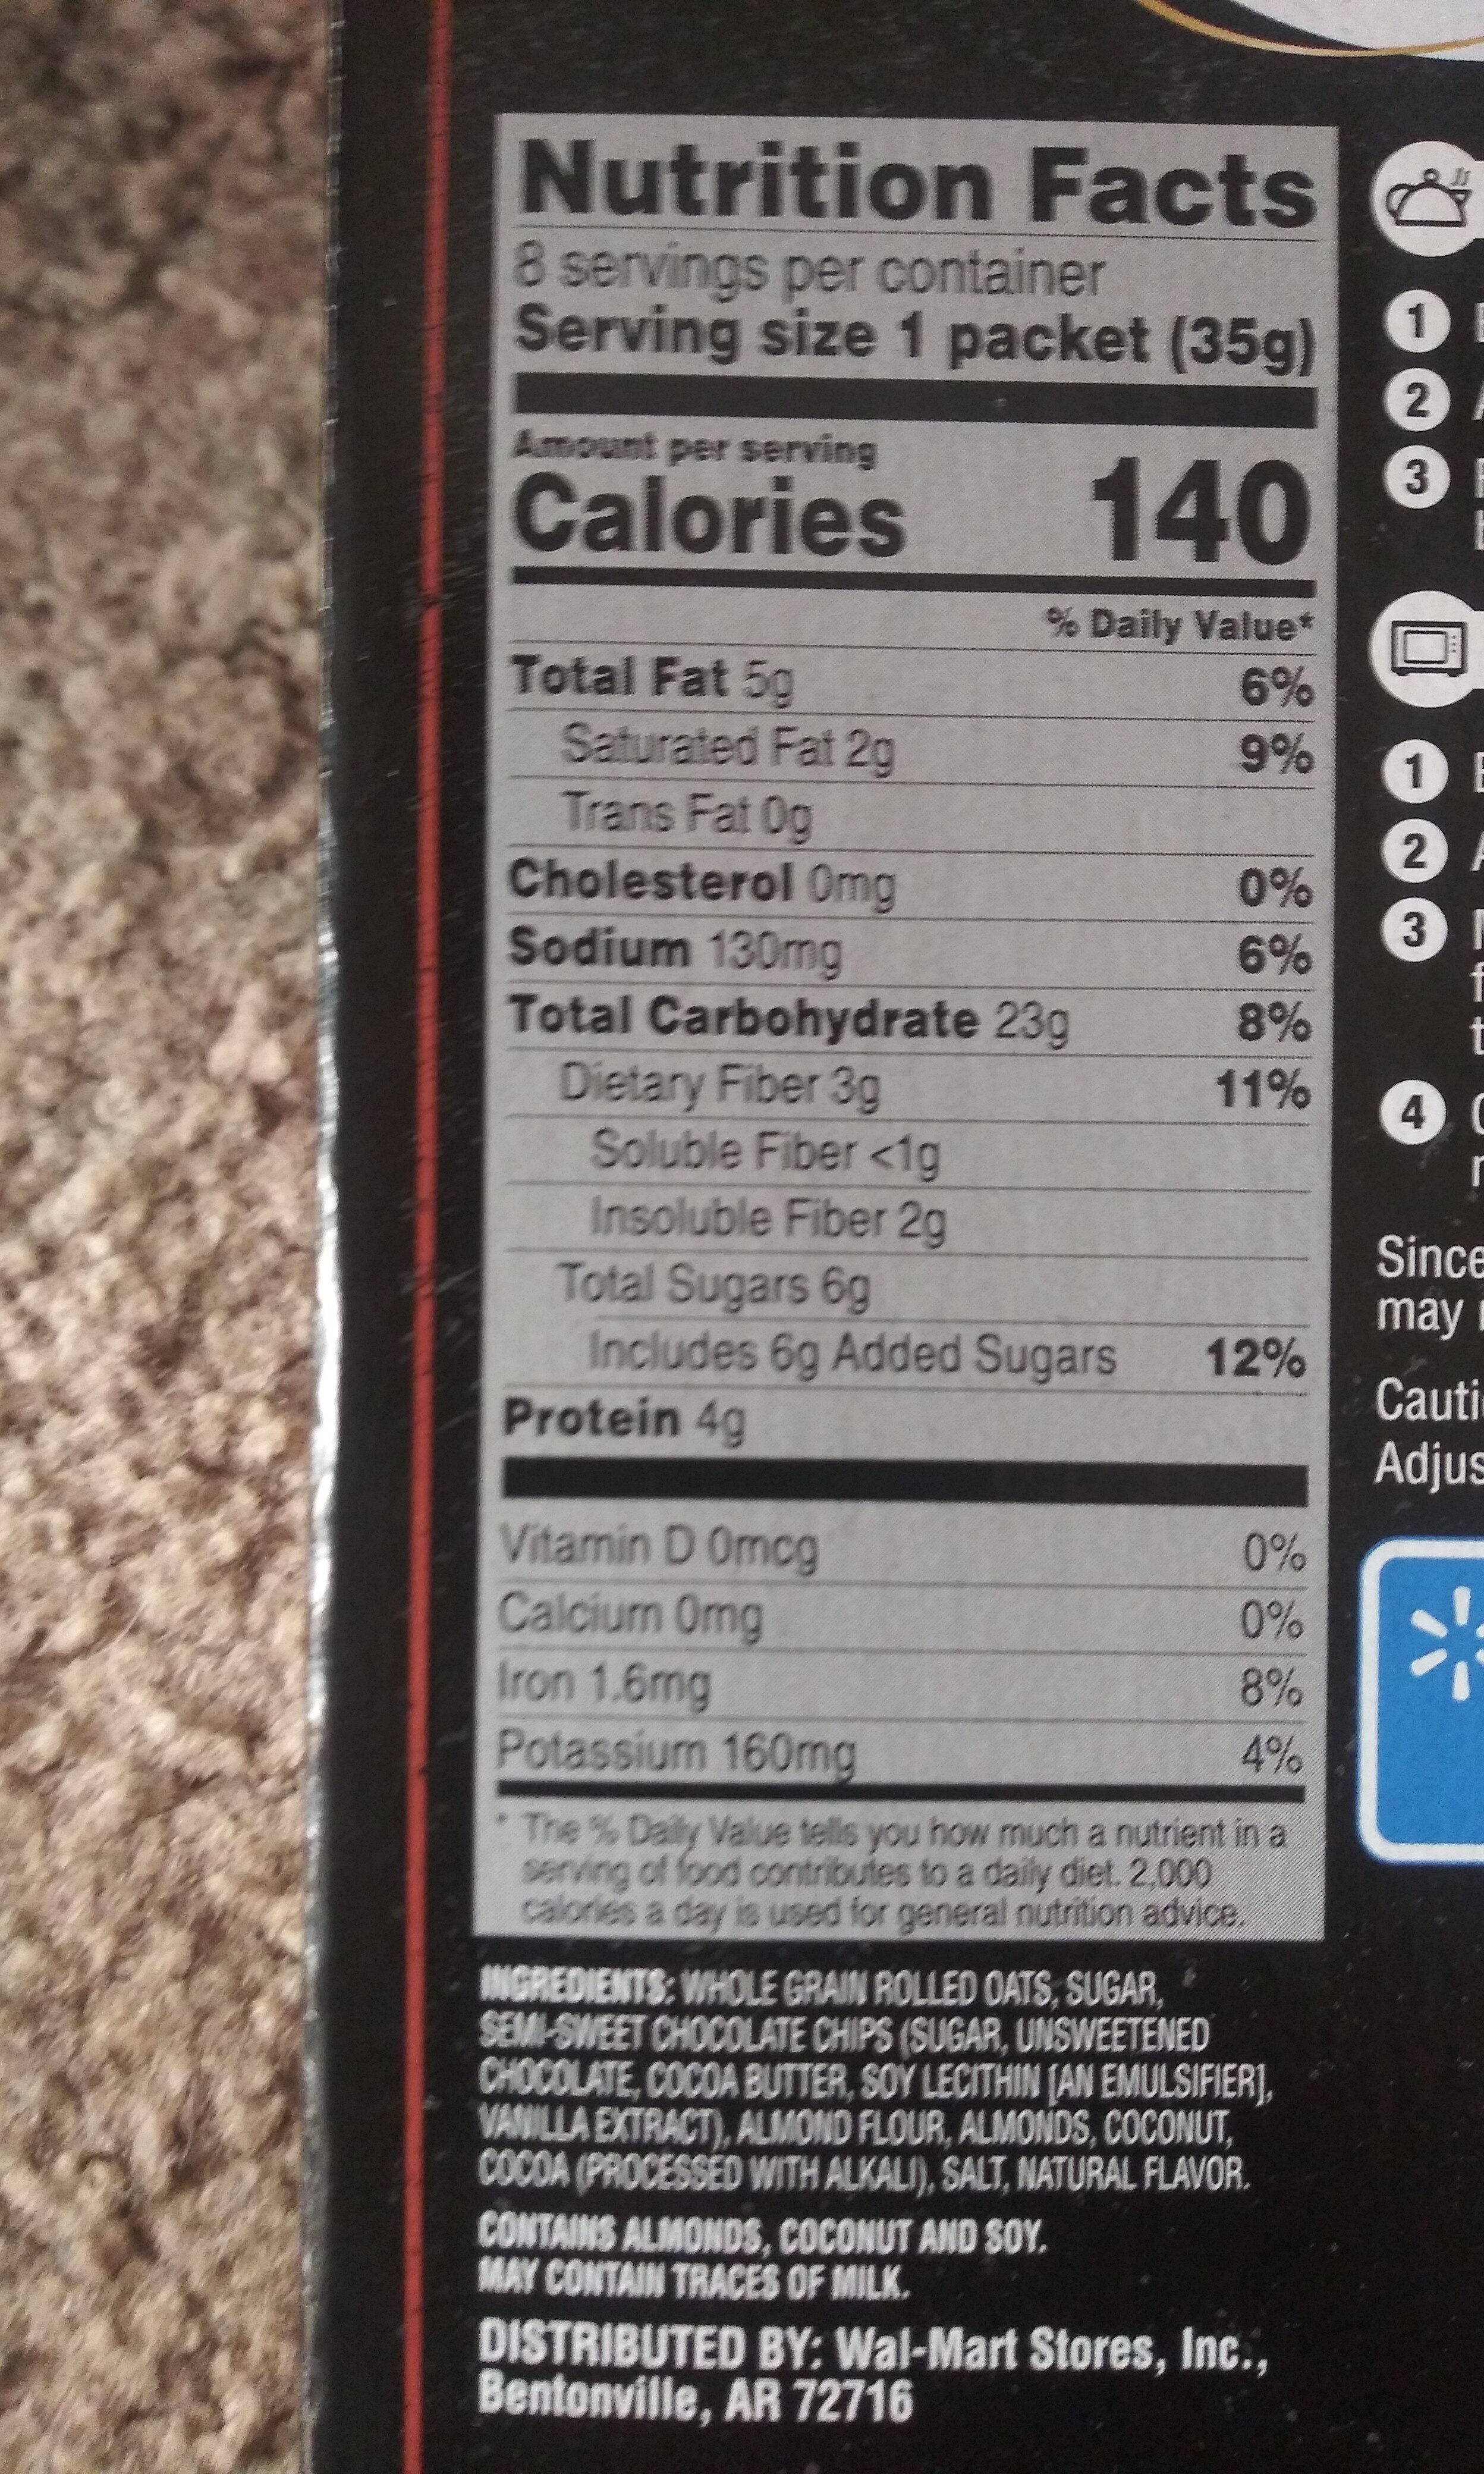 dark chocolate almond coconut instant oatmeal - Nutrition facts